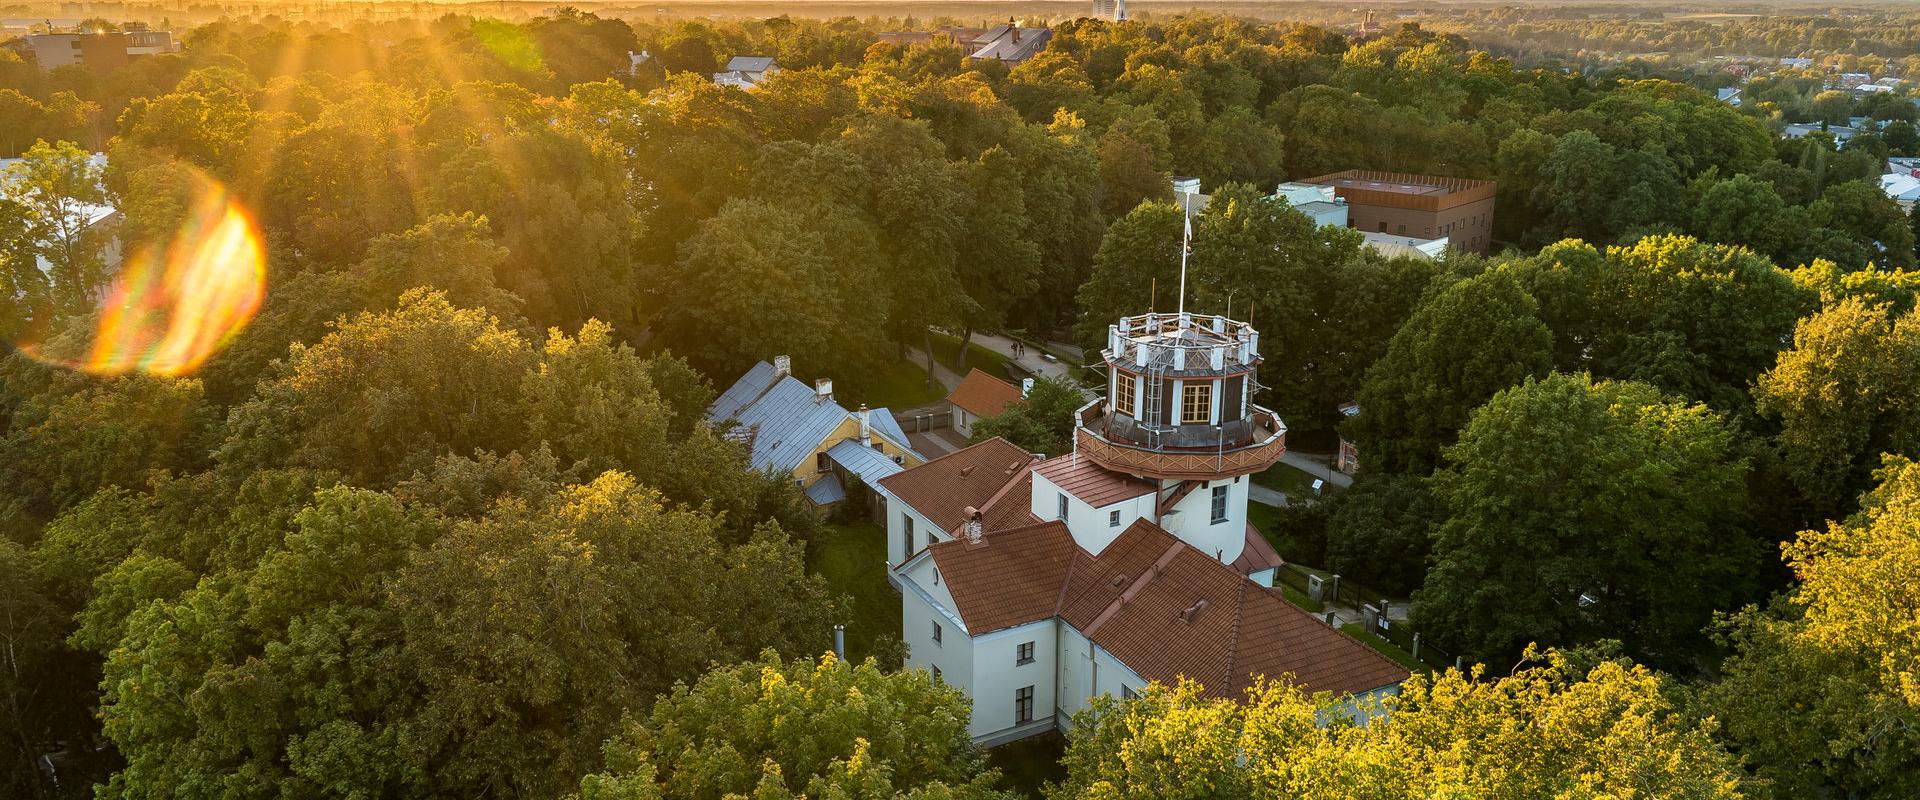 Tartu Old Observatory, Toome Hill and a sunset from a bird’s-eye view